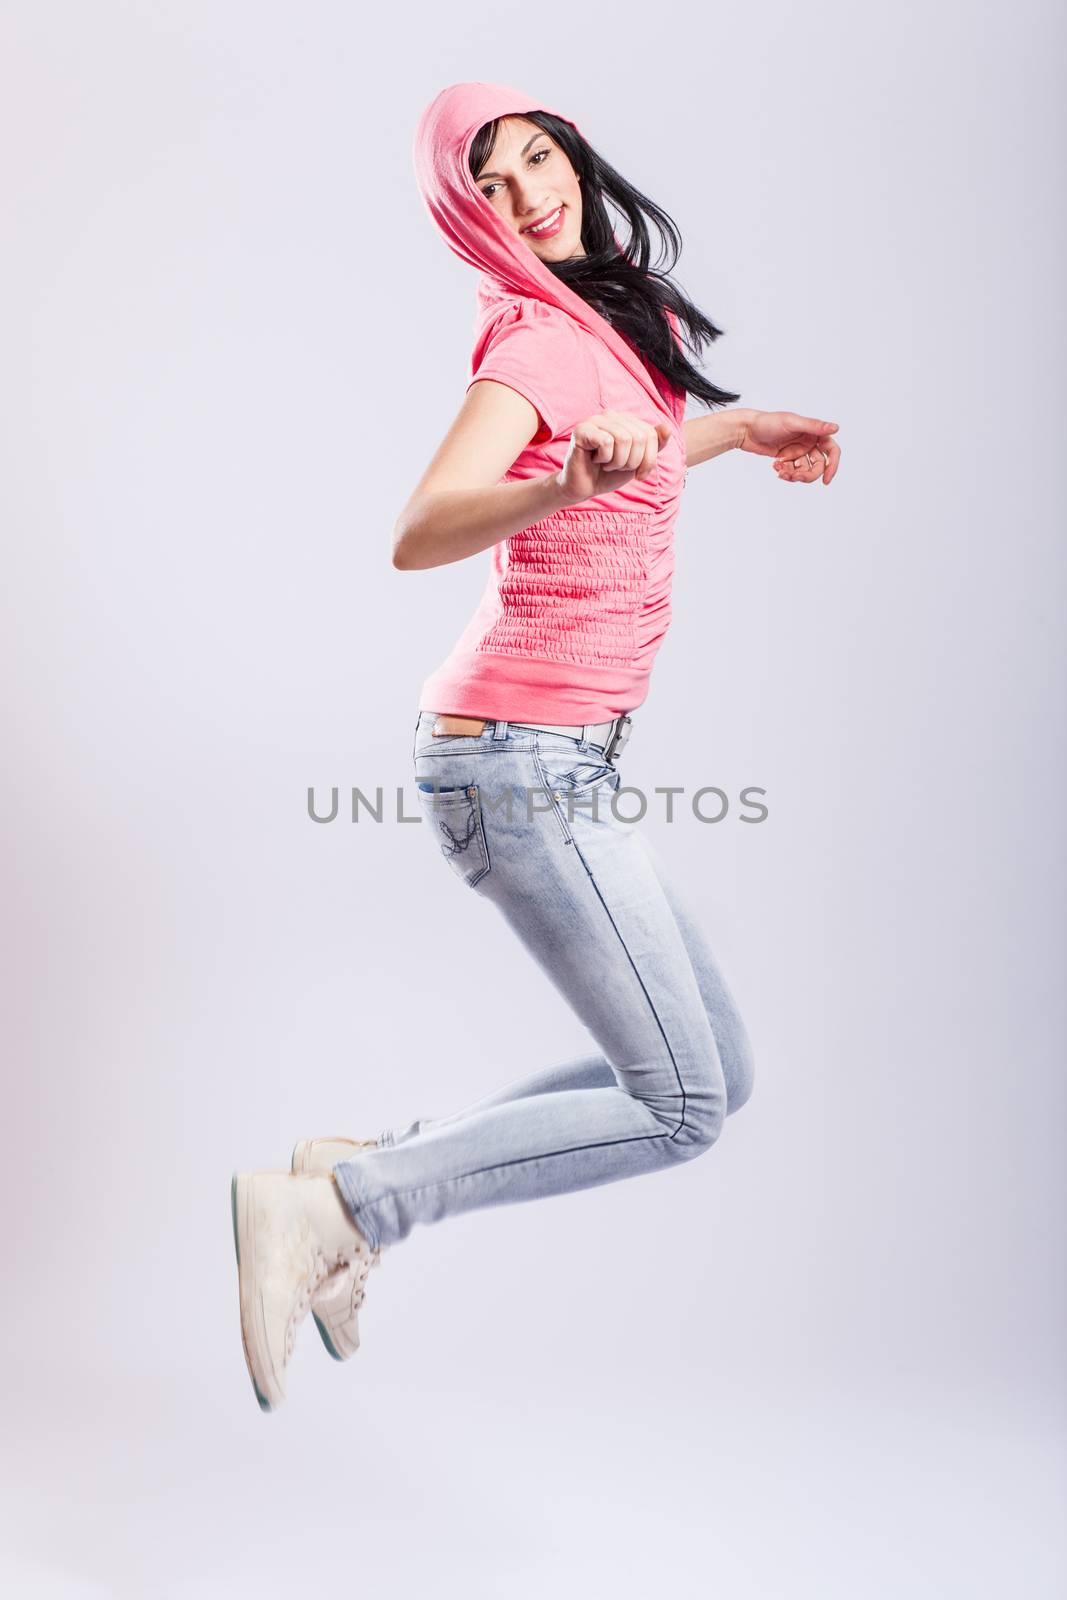 attractive young girl jumping by kokimk